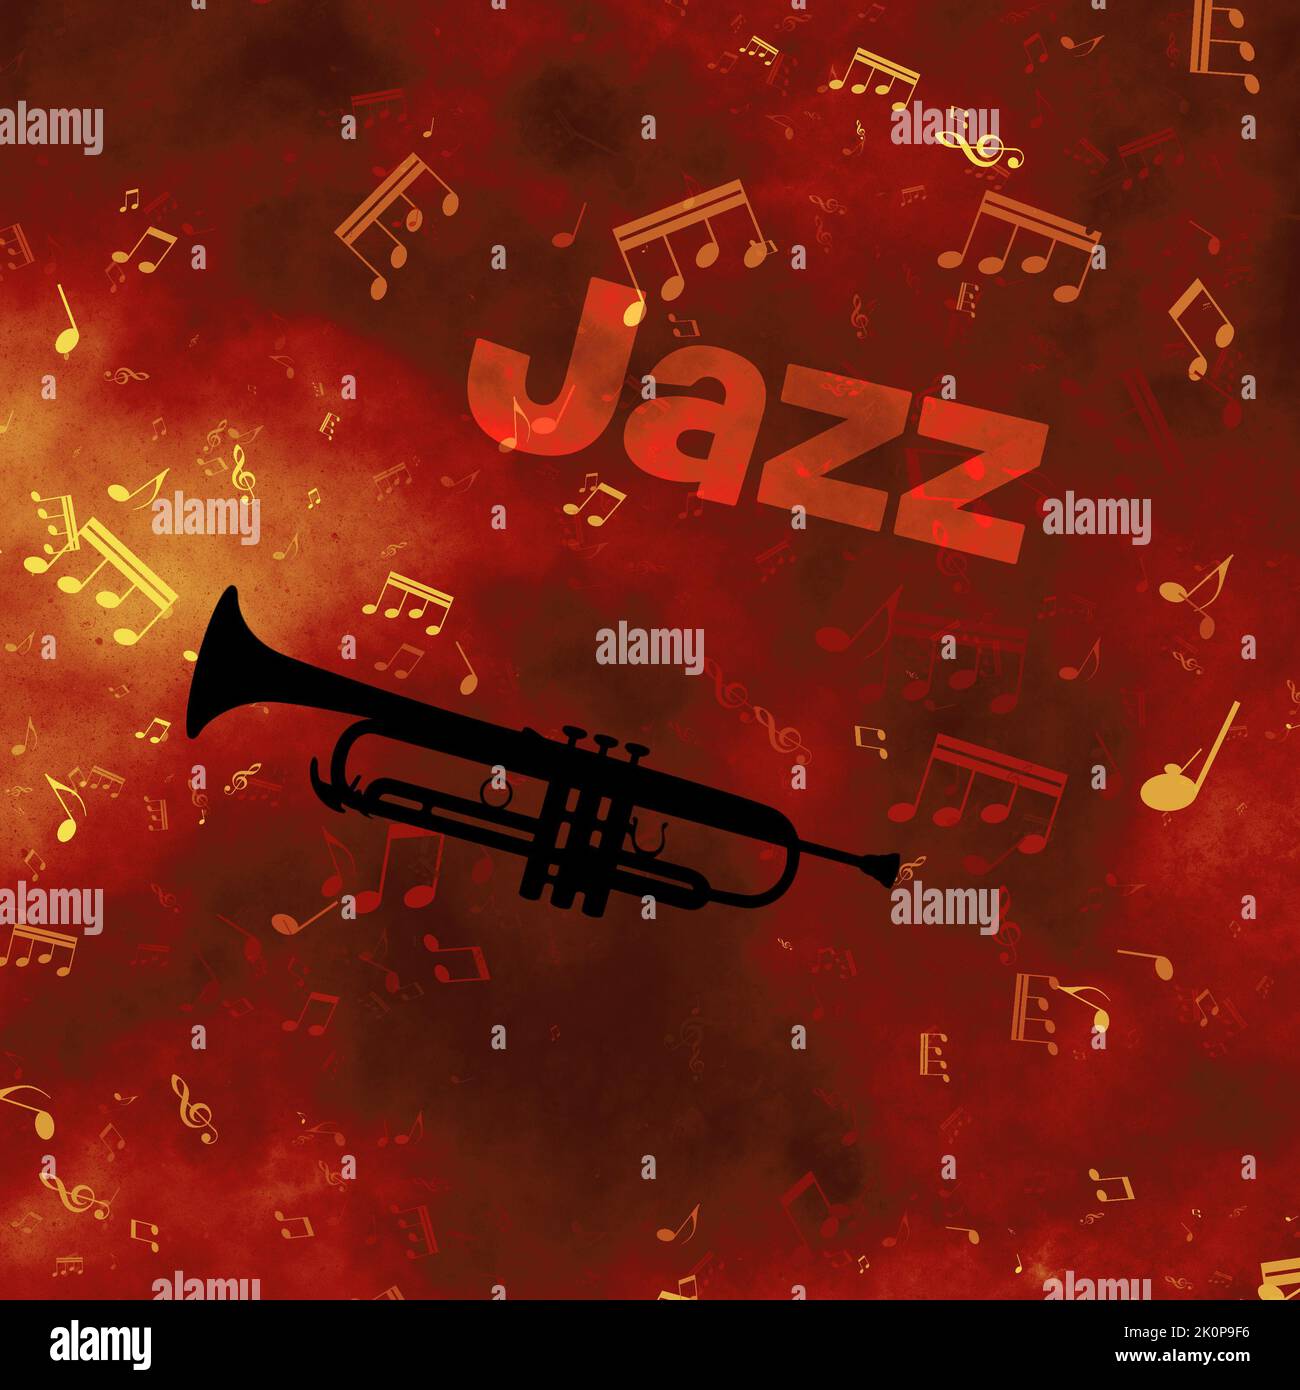 trumpet instrument and background of music notes for Jazz music concept Stock Photo